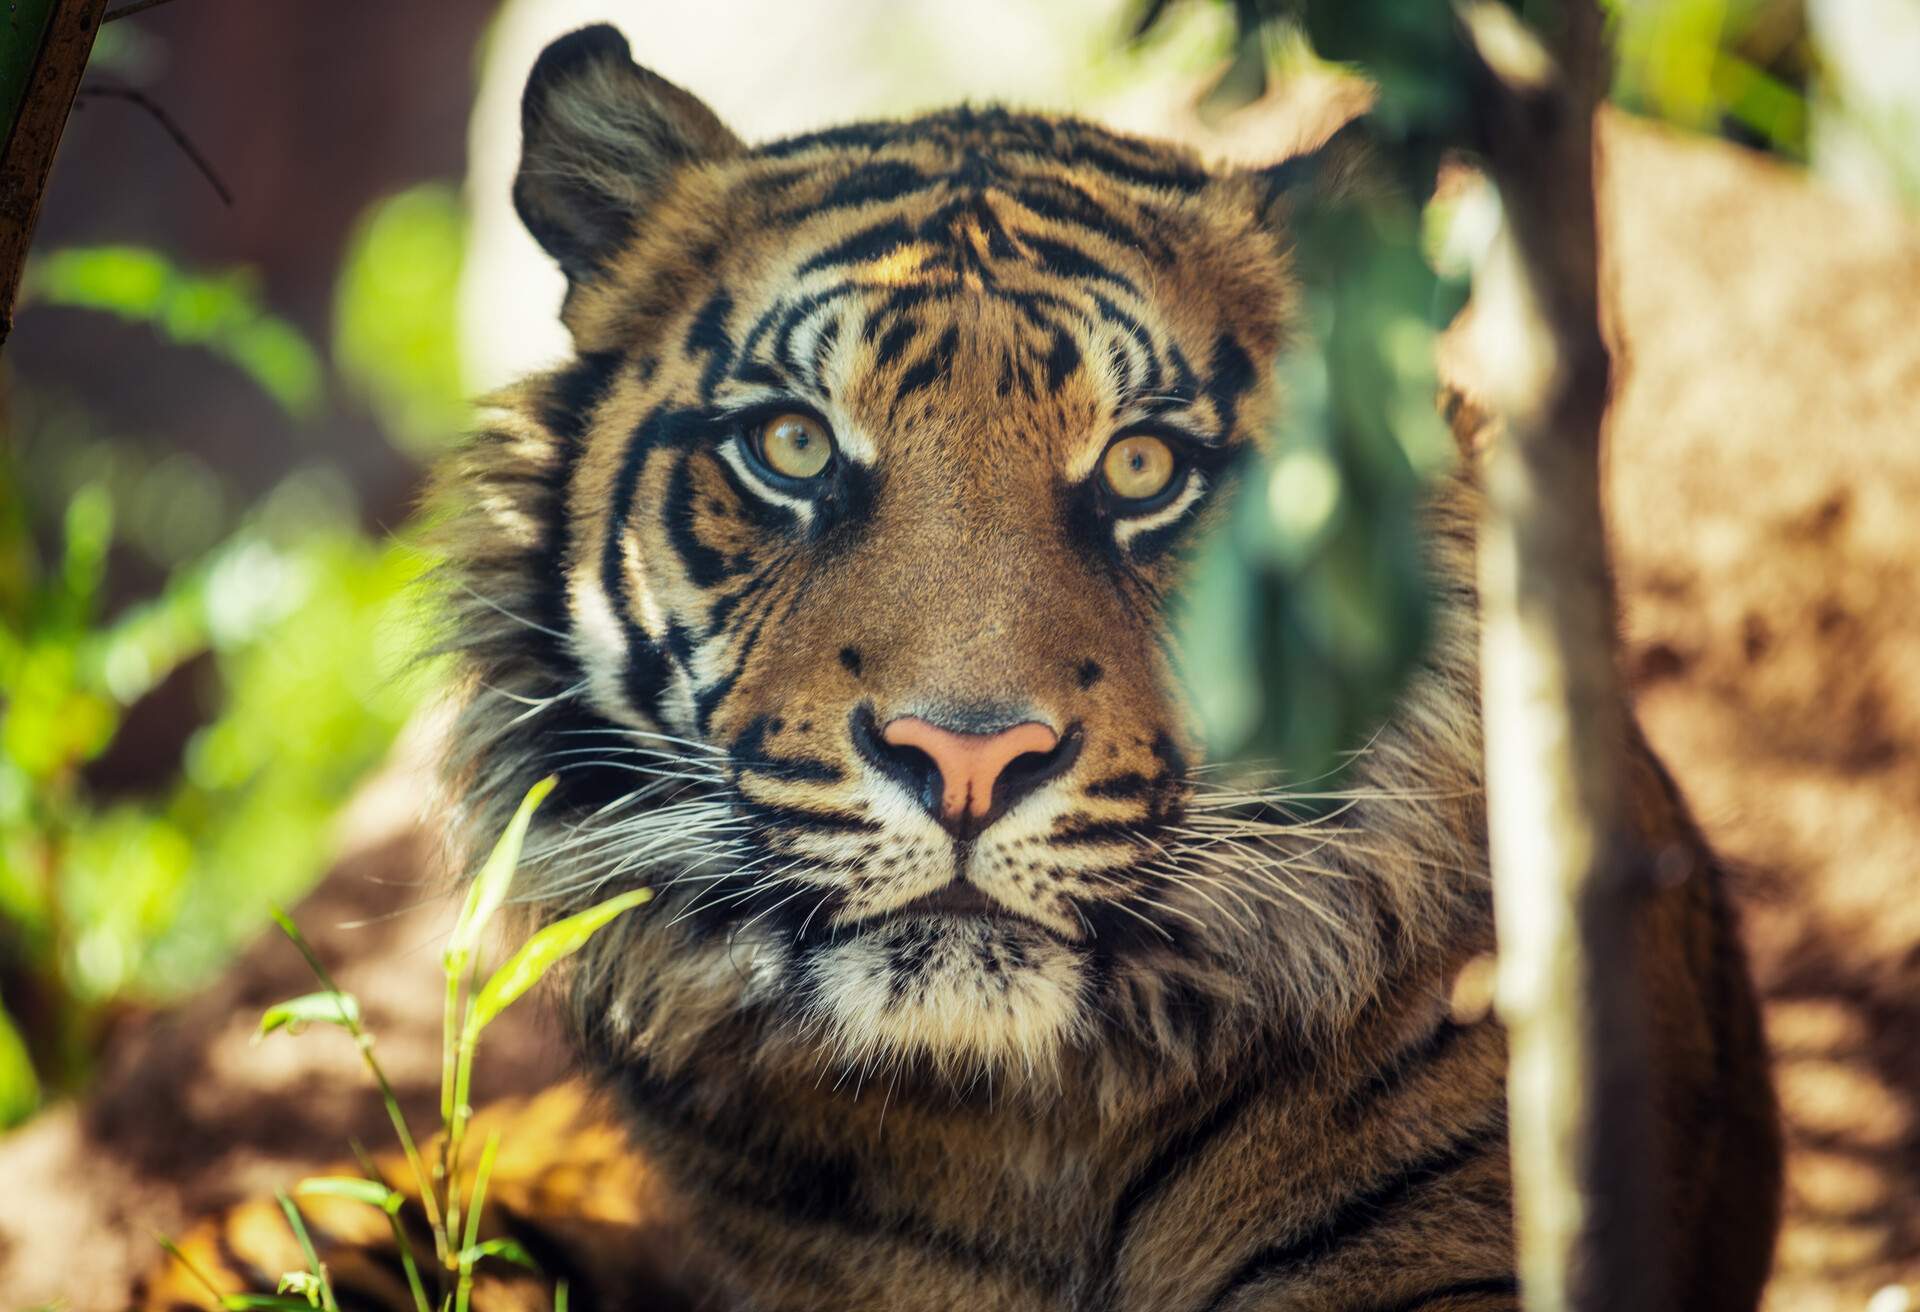 THEME_ANIMAL_TIGER_ZOO_GettyImages-1141797328